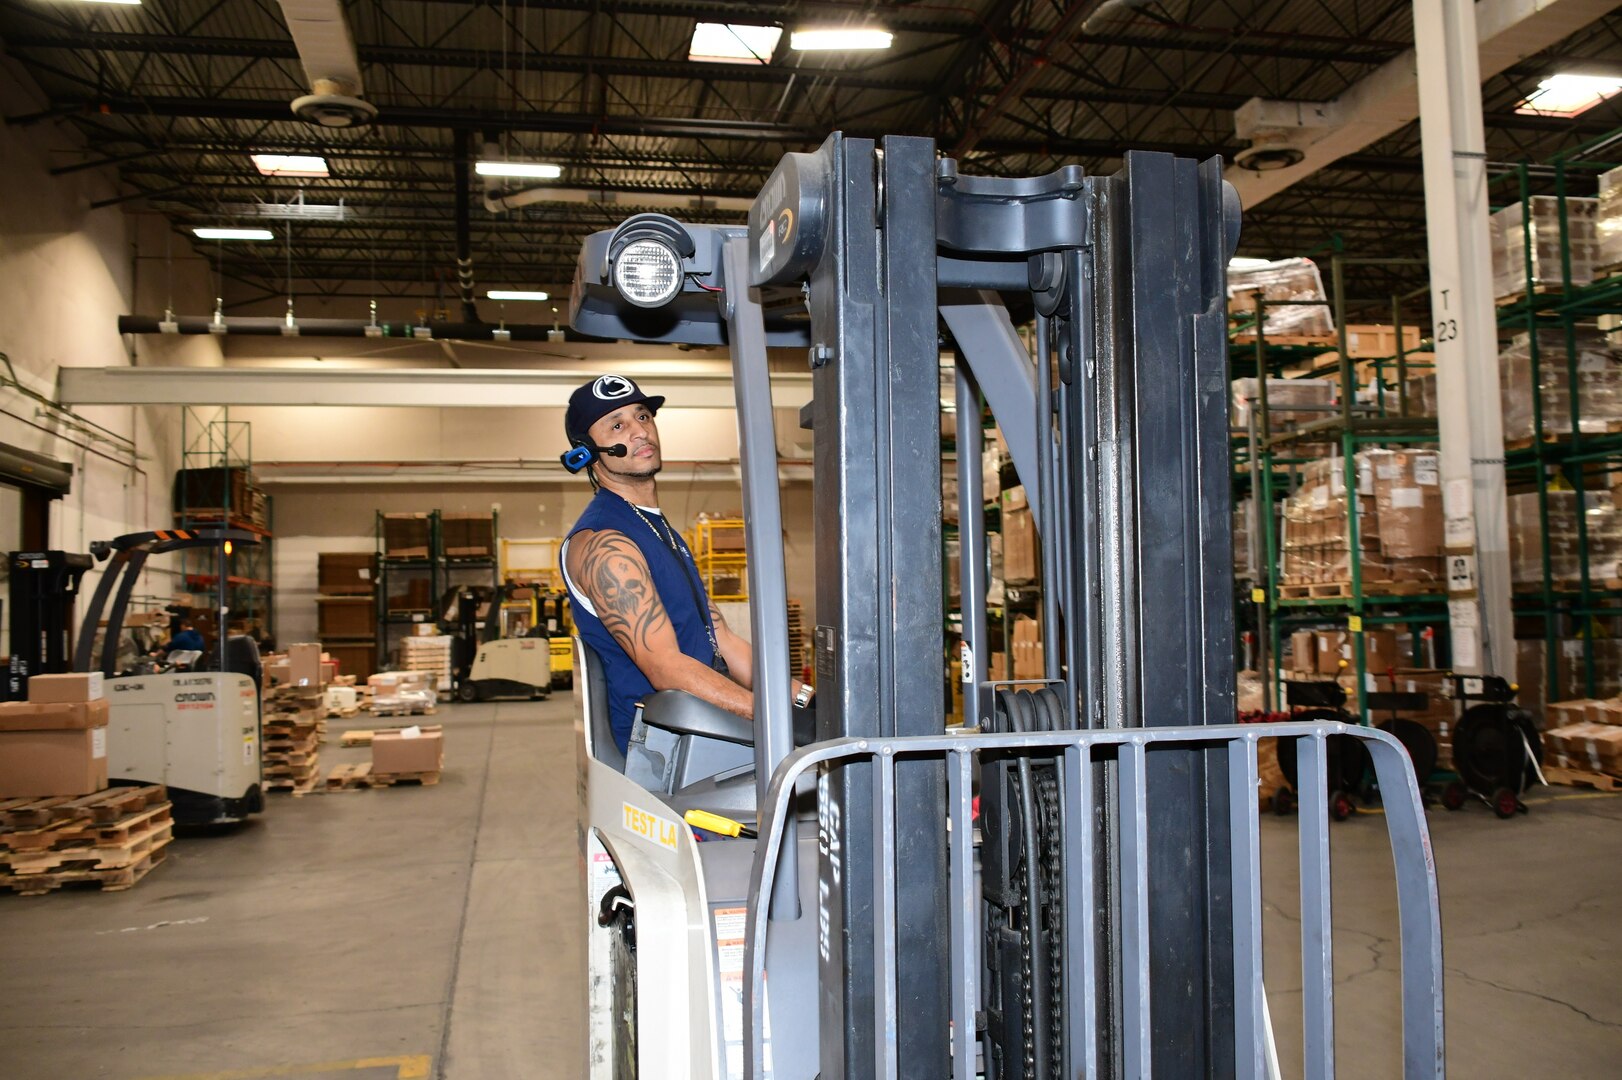 Distribution Susquehanna implements voice technology in its Eastern Distribution Center